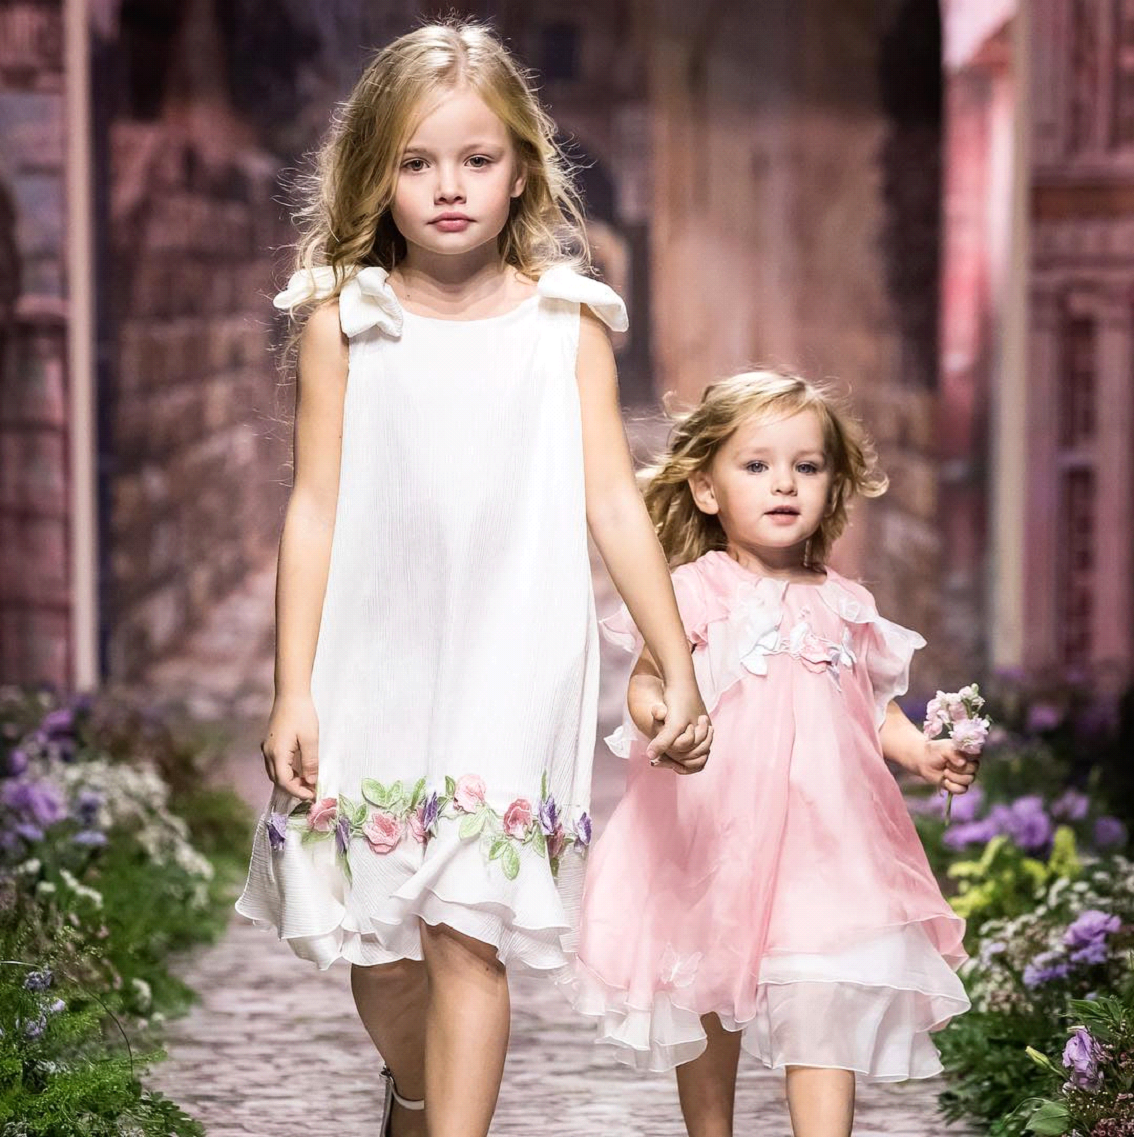 Children's Fashion: Trends For Girls And Boys